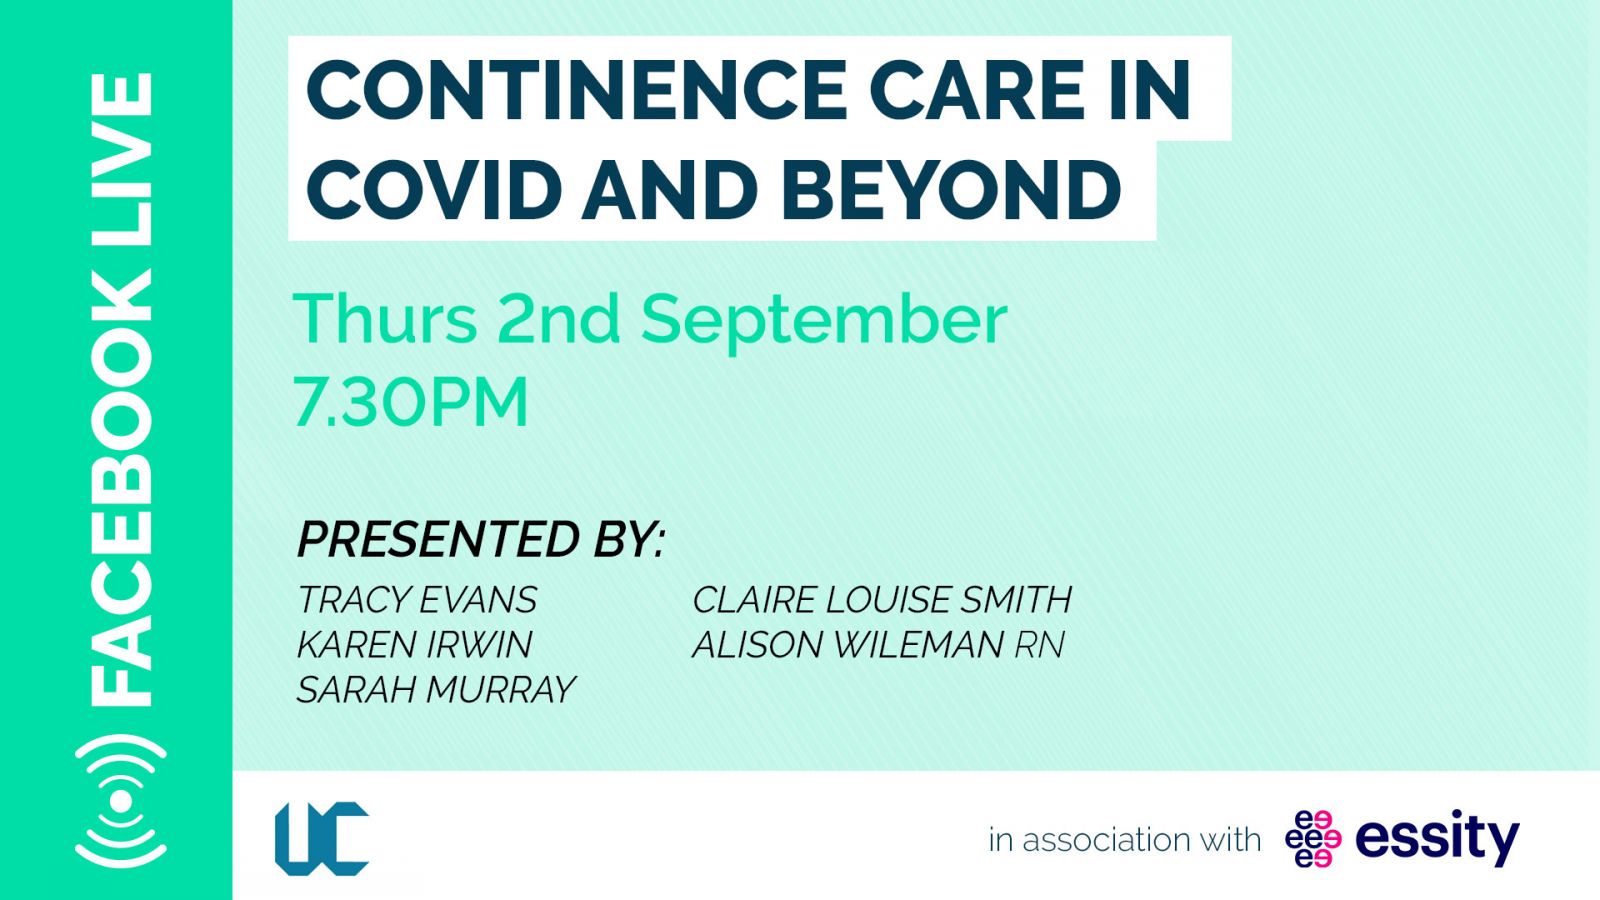 Facebook Live: Continence care in Covid and beyond